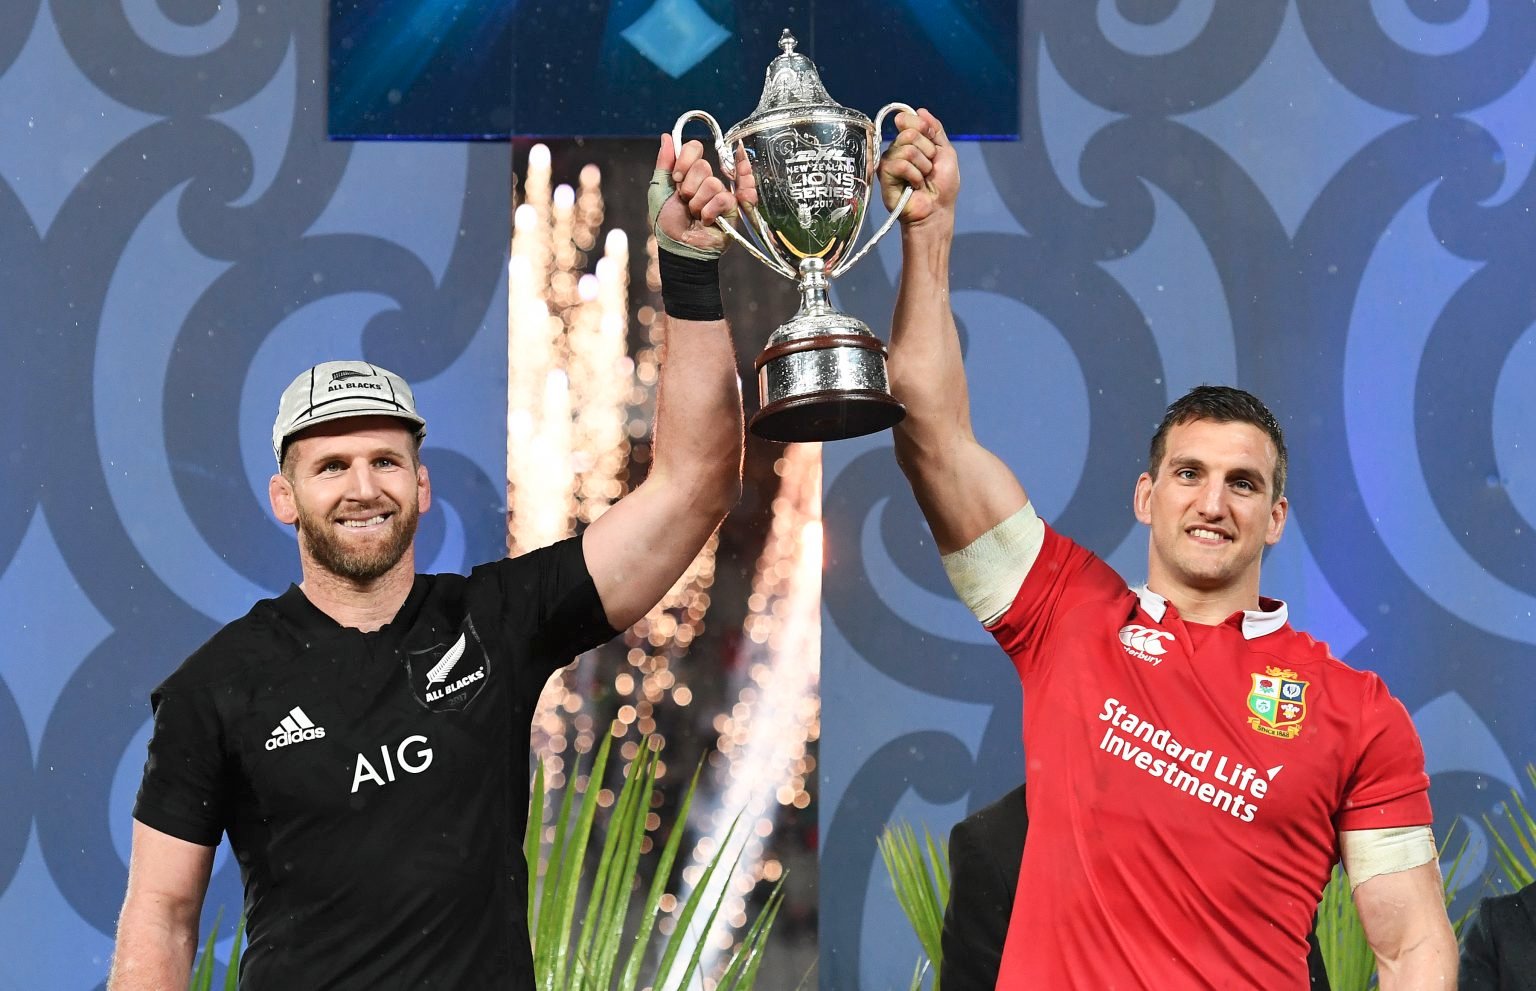 Lions and All Black players lift trophy together